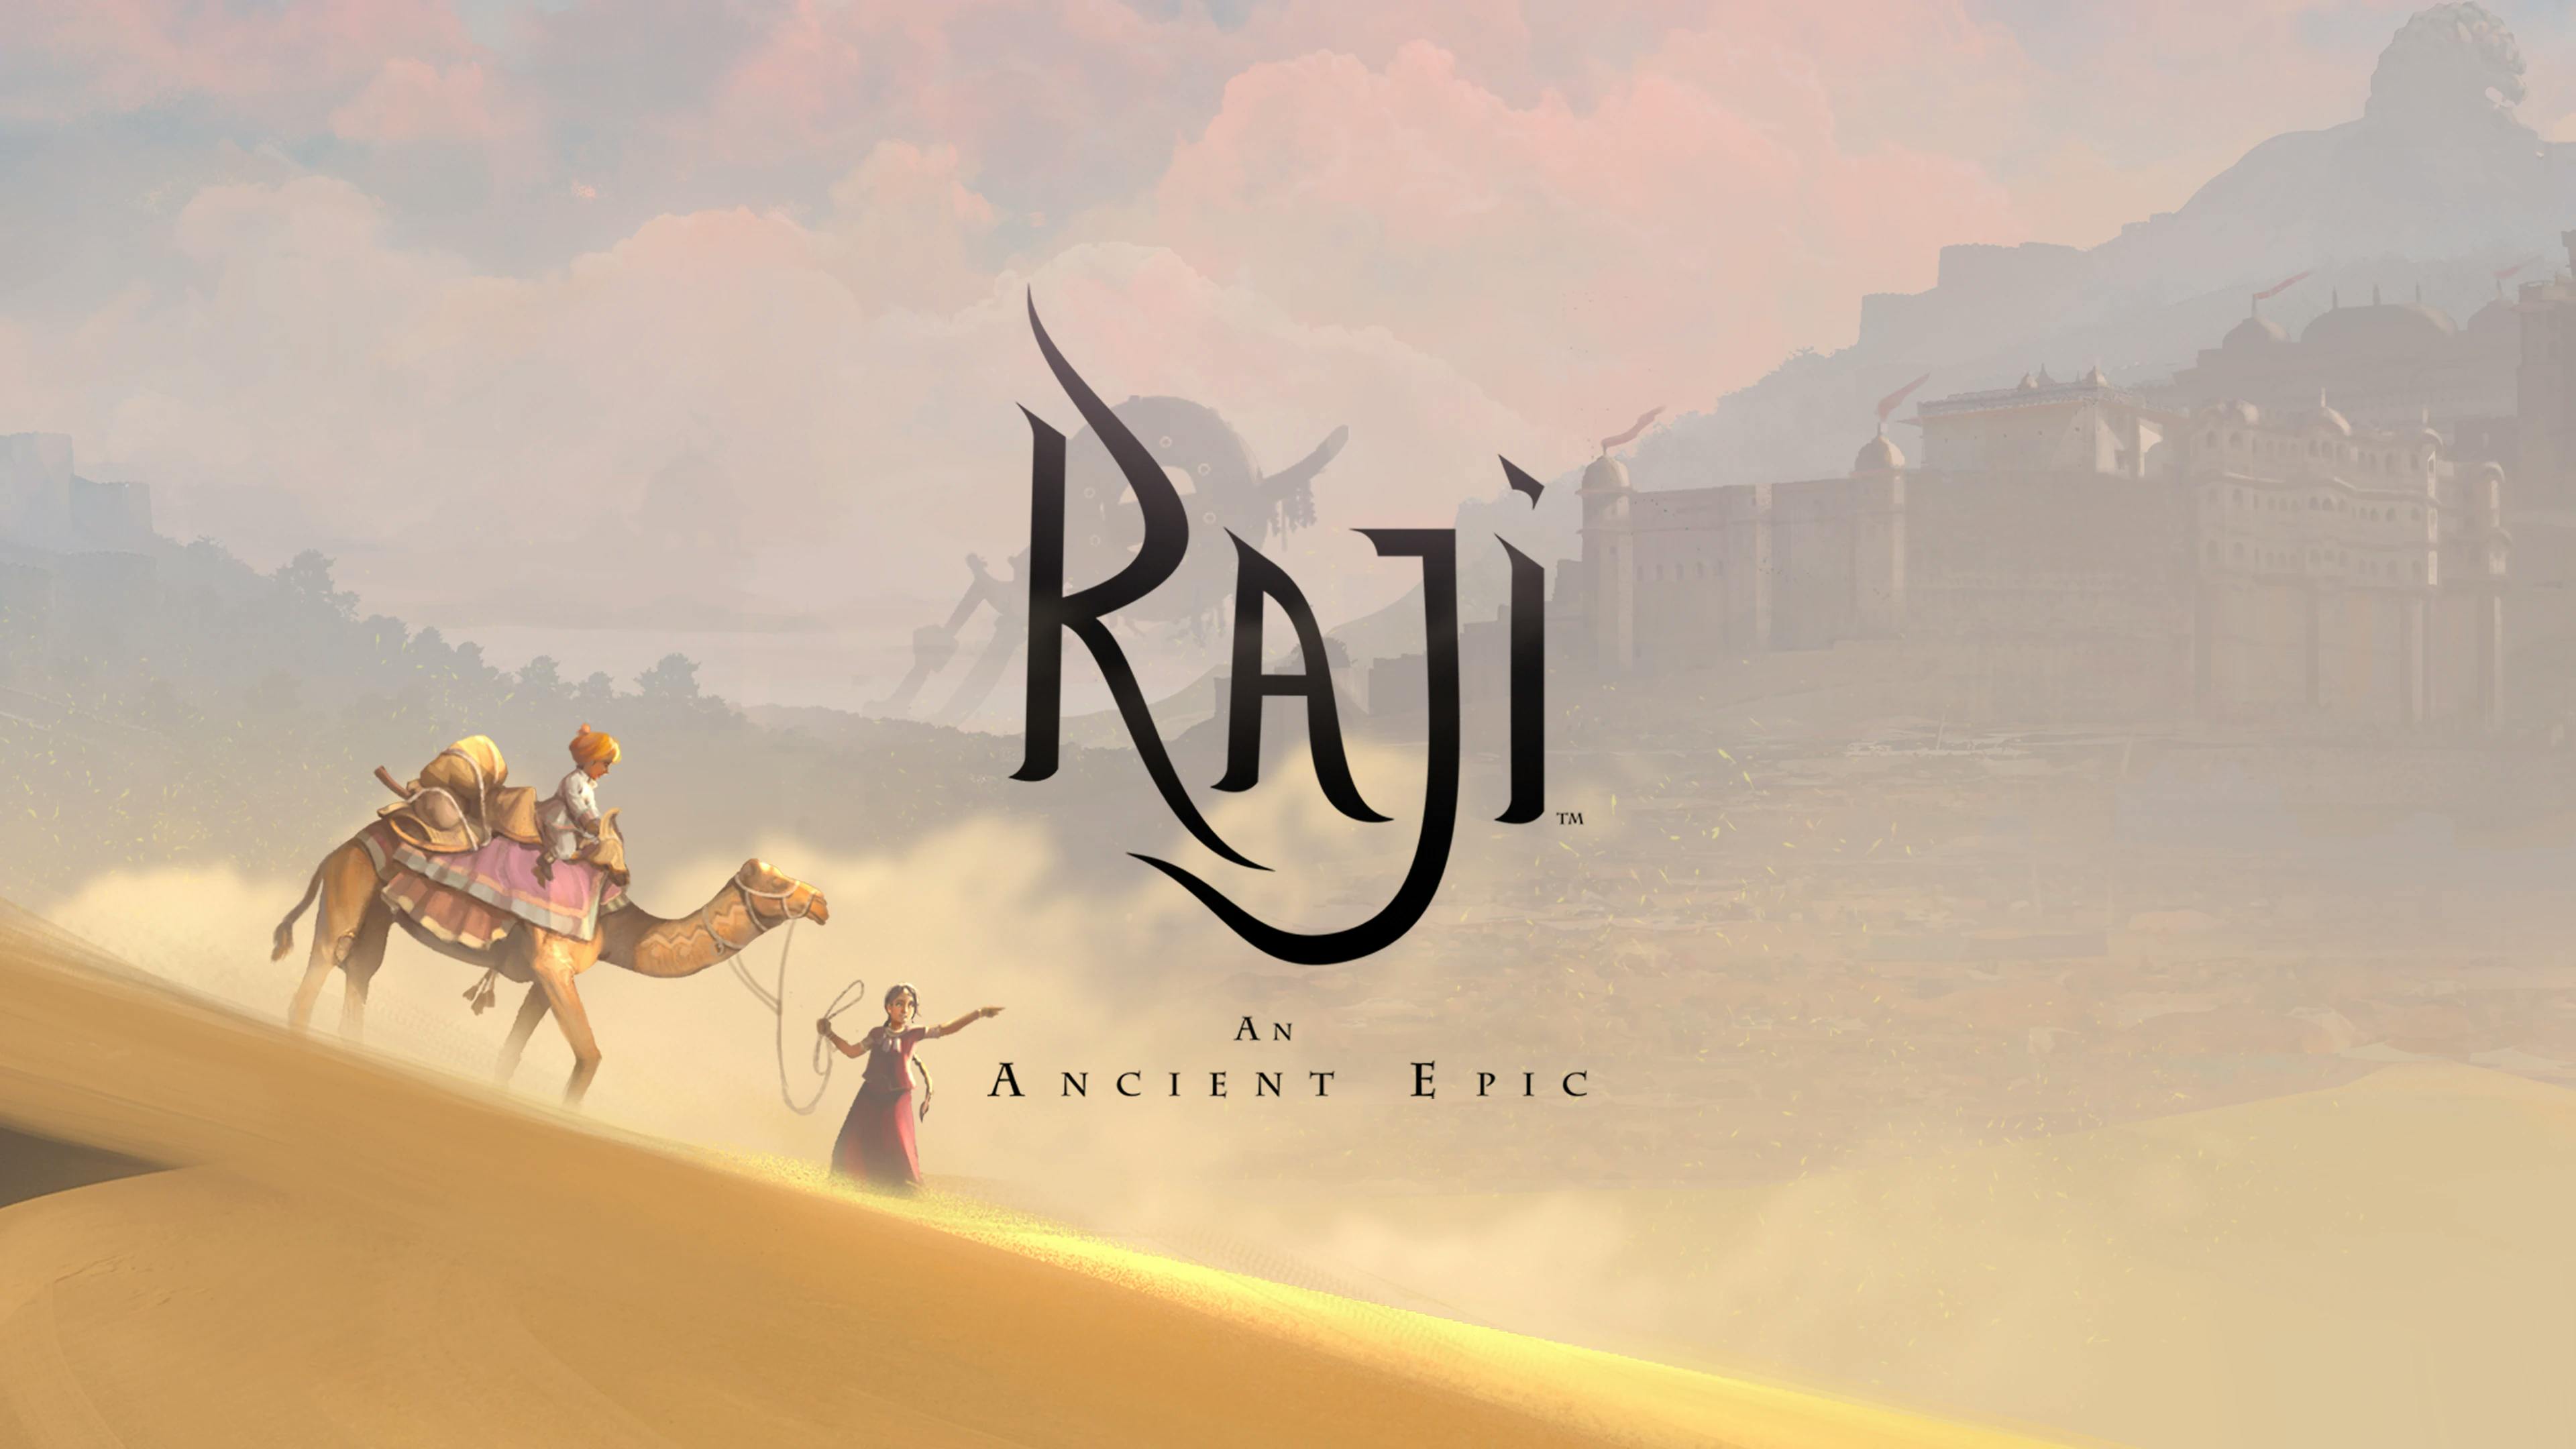 One of the Best Storyline of a Game | Raji: An Ancient Epic Game